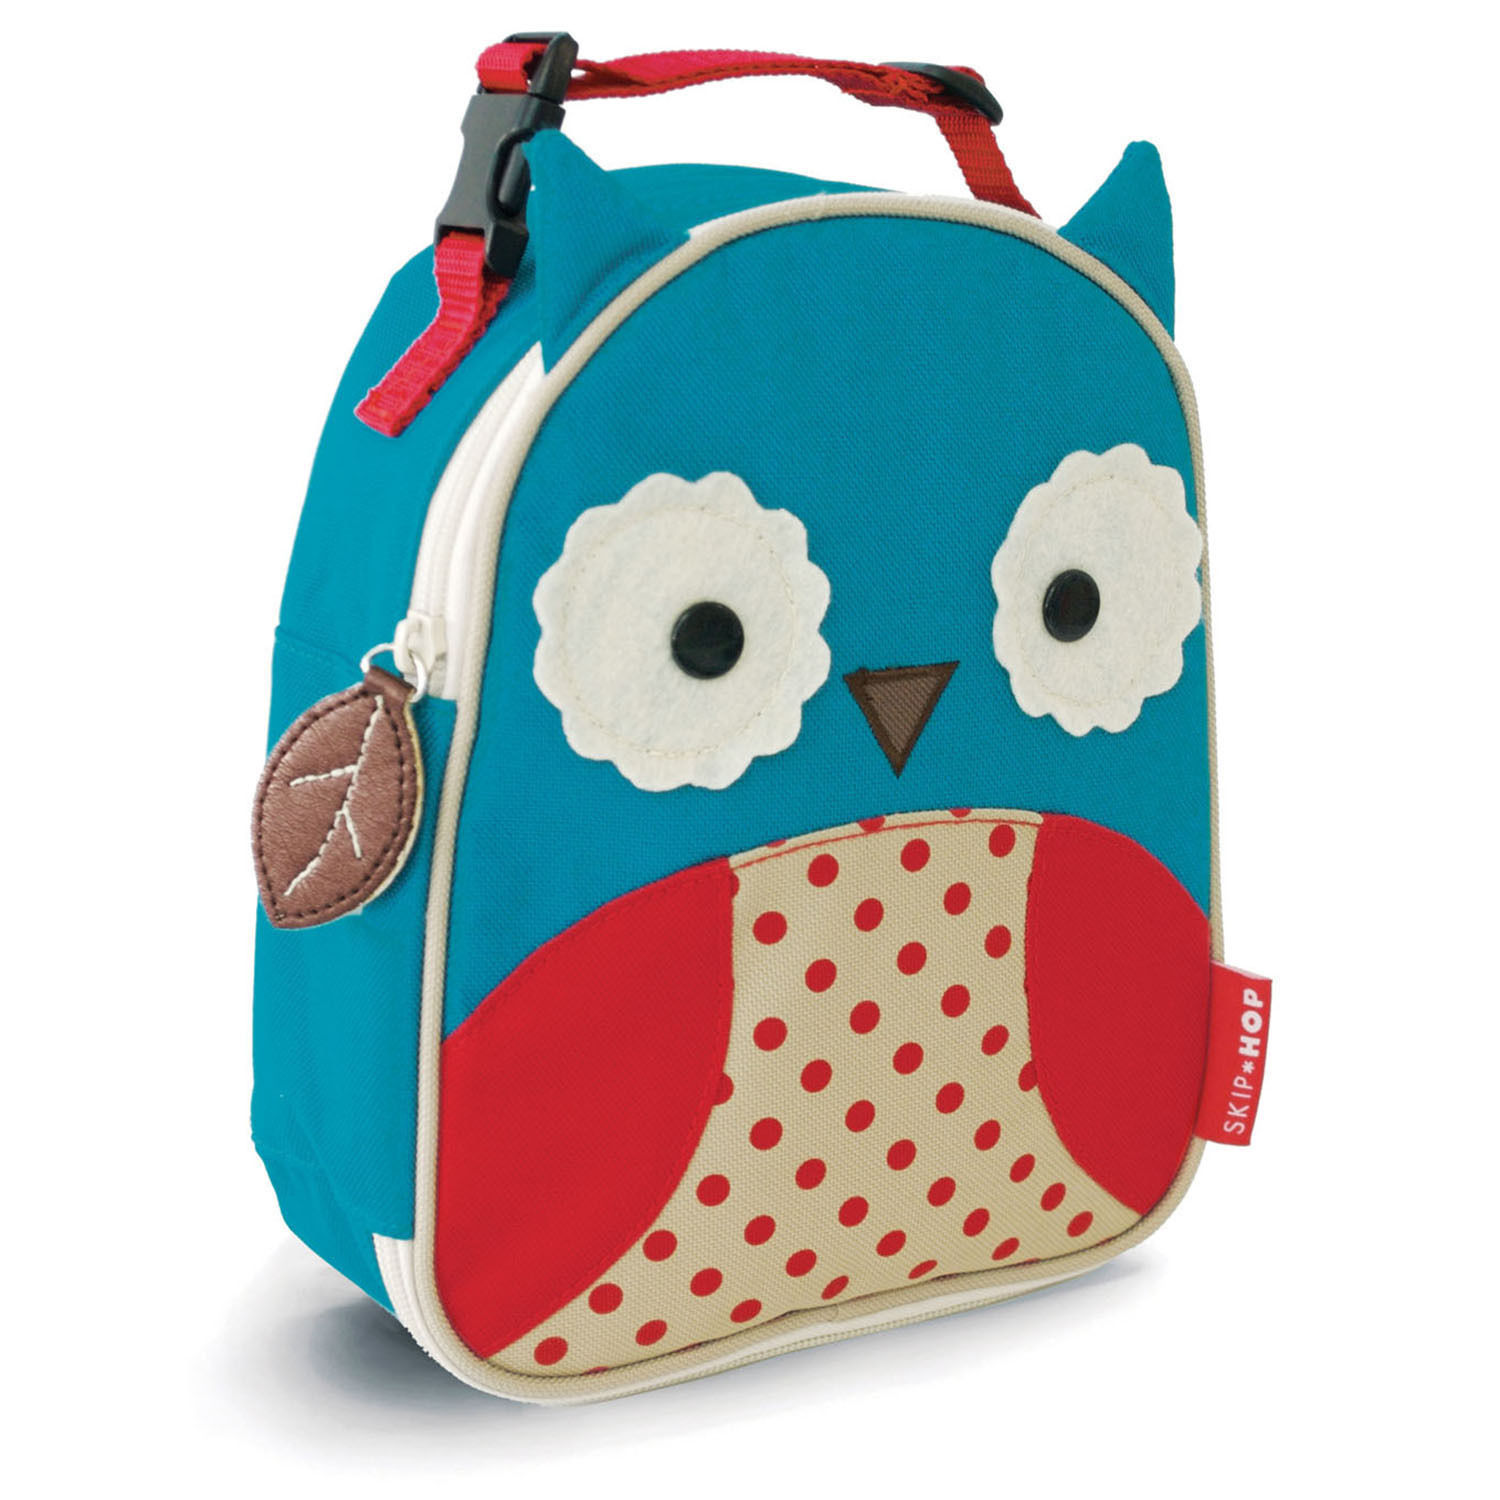 SKIP HOP ANIMAL ZOO LUNCHIES INSULATED LUNCH BAG - SKIPHOP - 5 TO ...